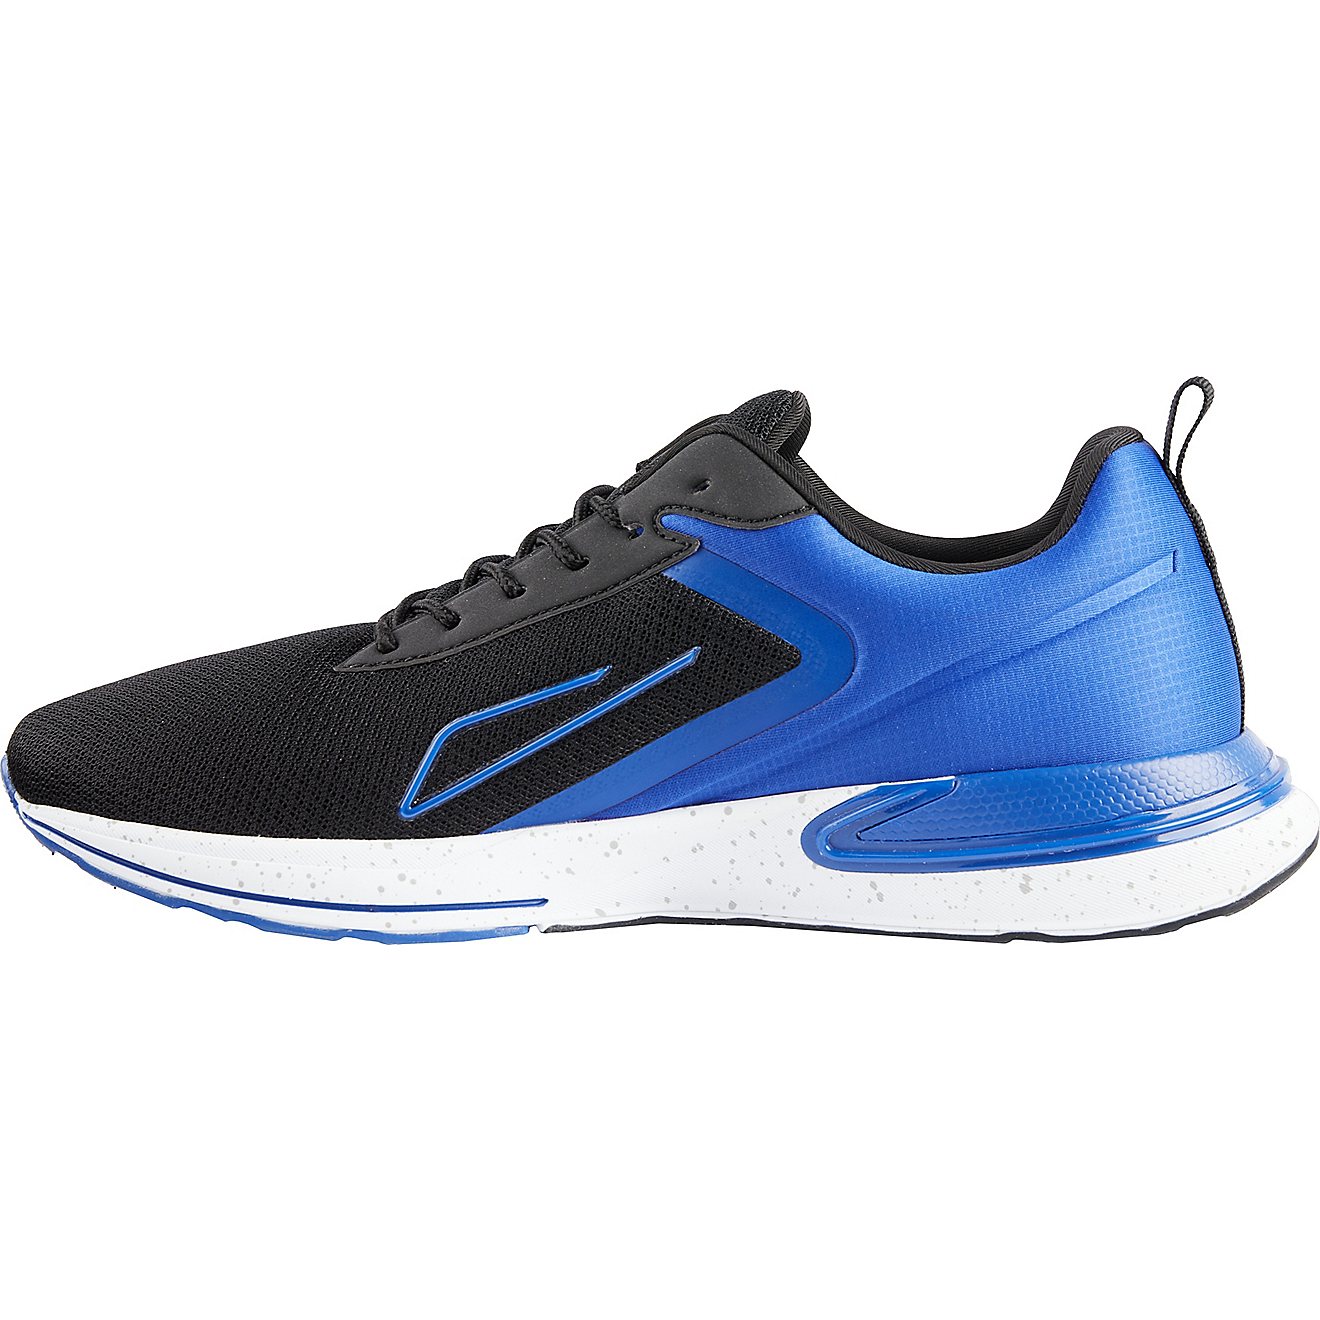 BCG Men's Exertion Training Shoes | Free Shipping at Academy